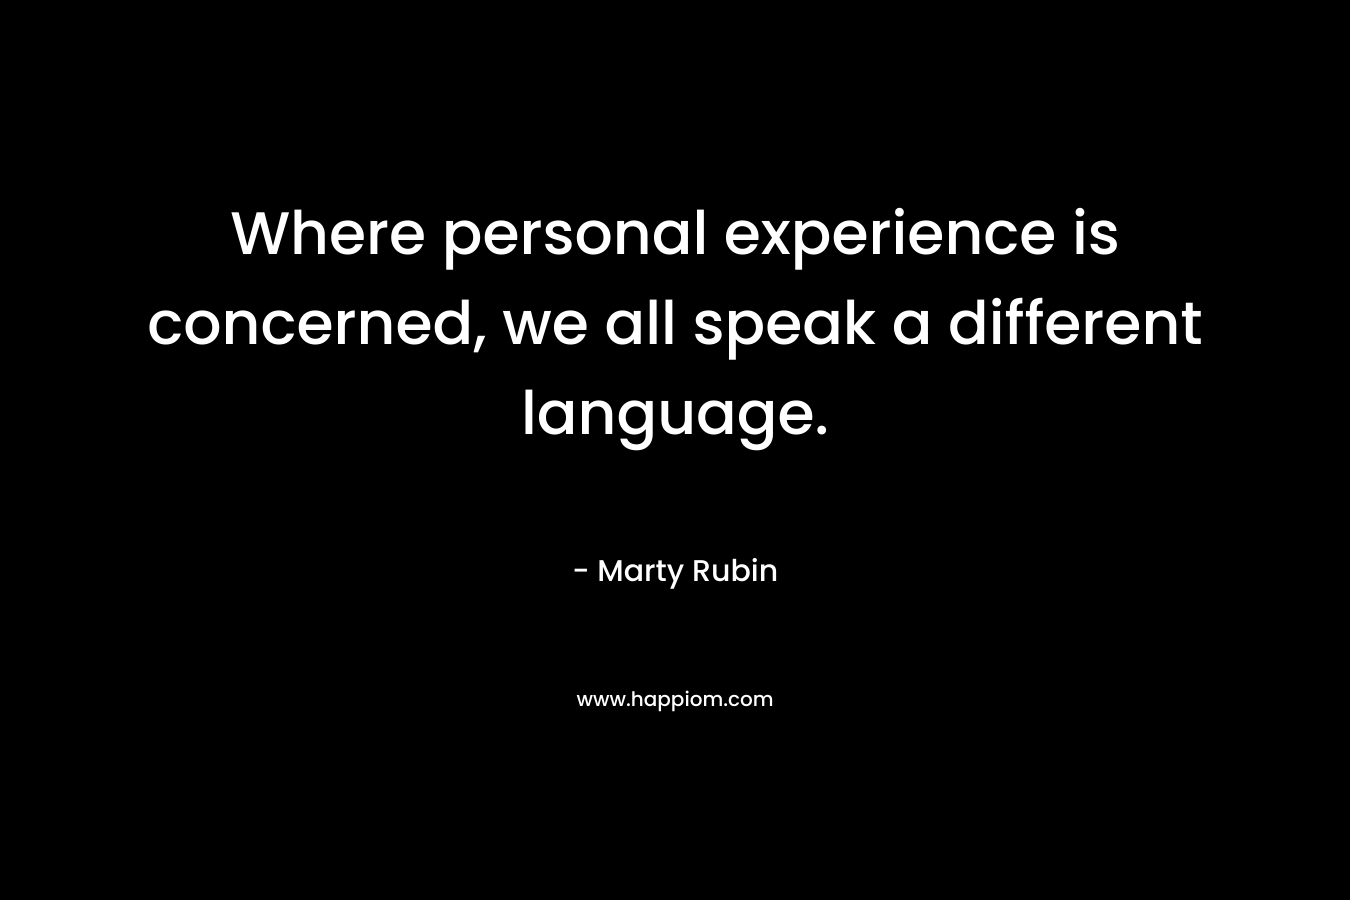 Where personal experience is concerned, we all speak a different language.